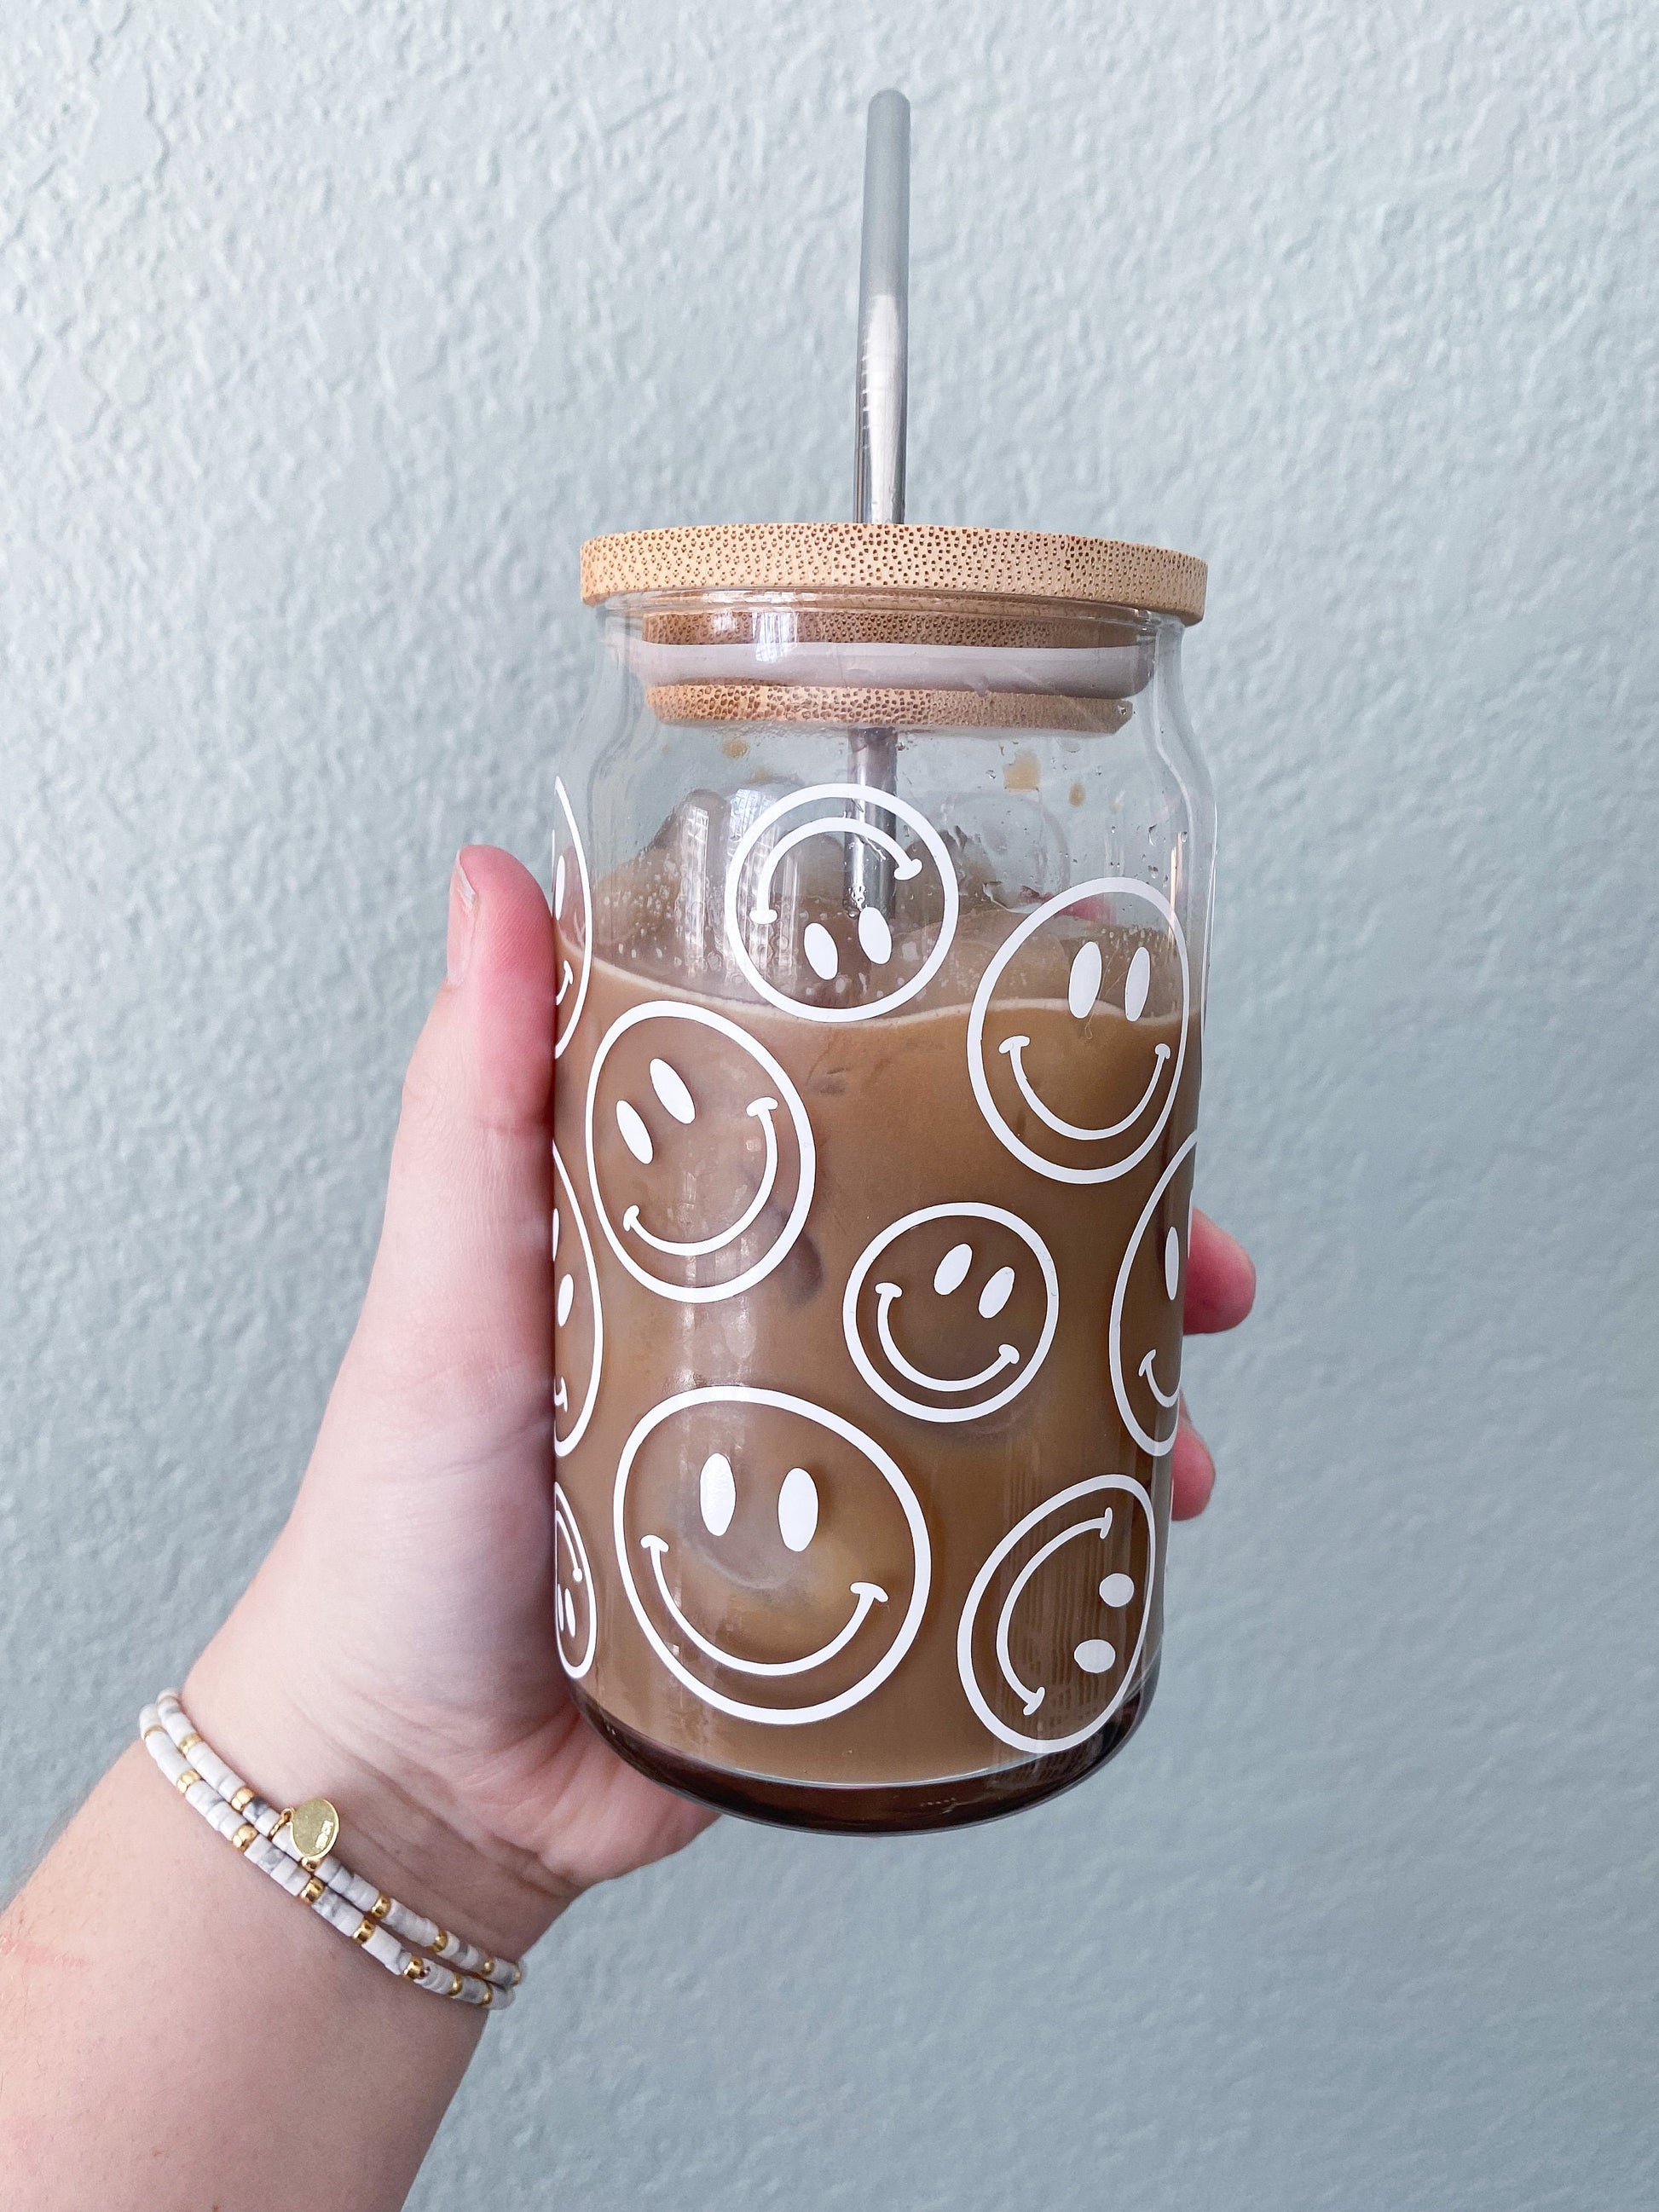 Bamboo Lids For Glass Cups